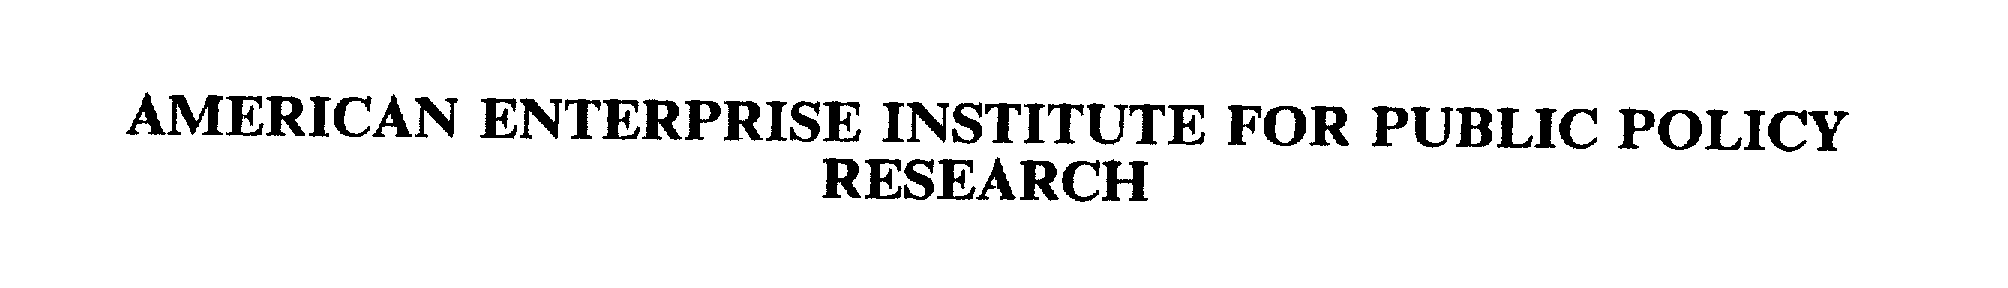  AMERICAN ENTERPRISE INSTITUTE FOR PUBLIC POLICY RESEARCH